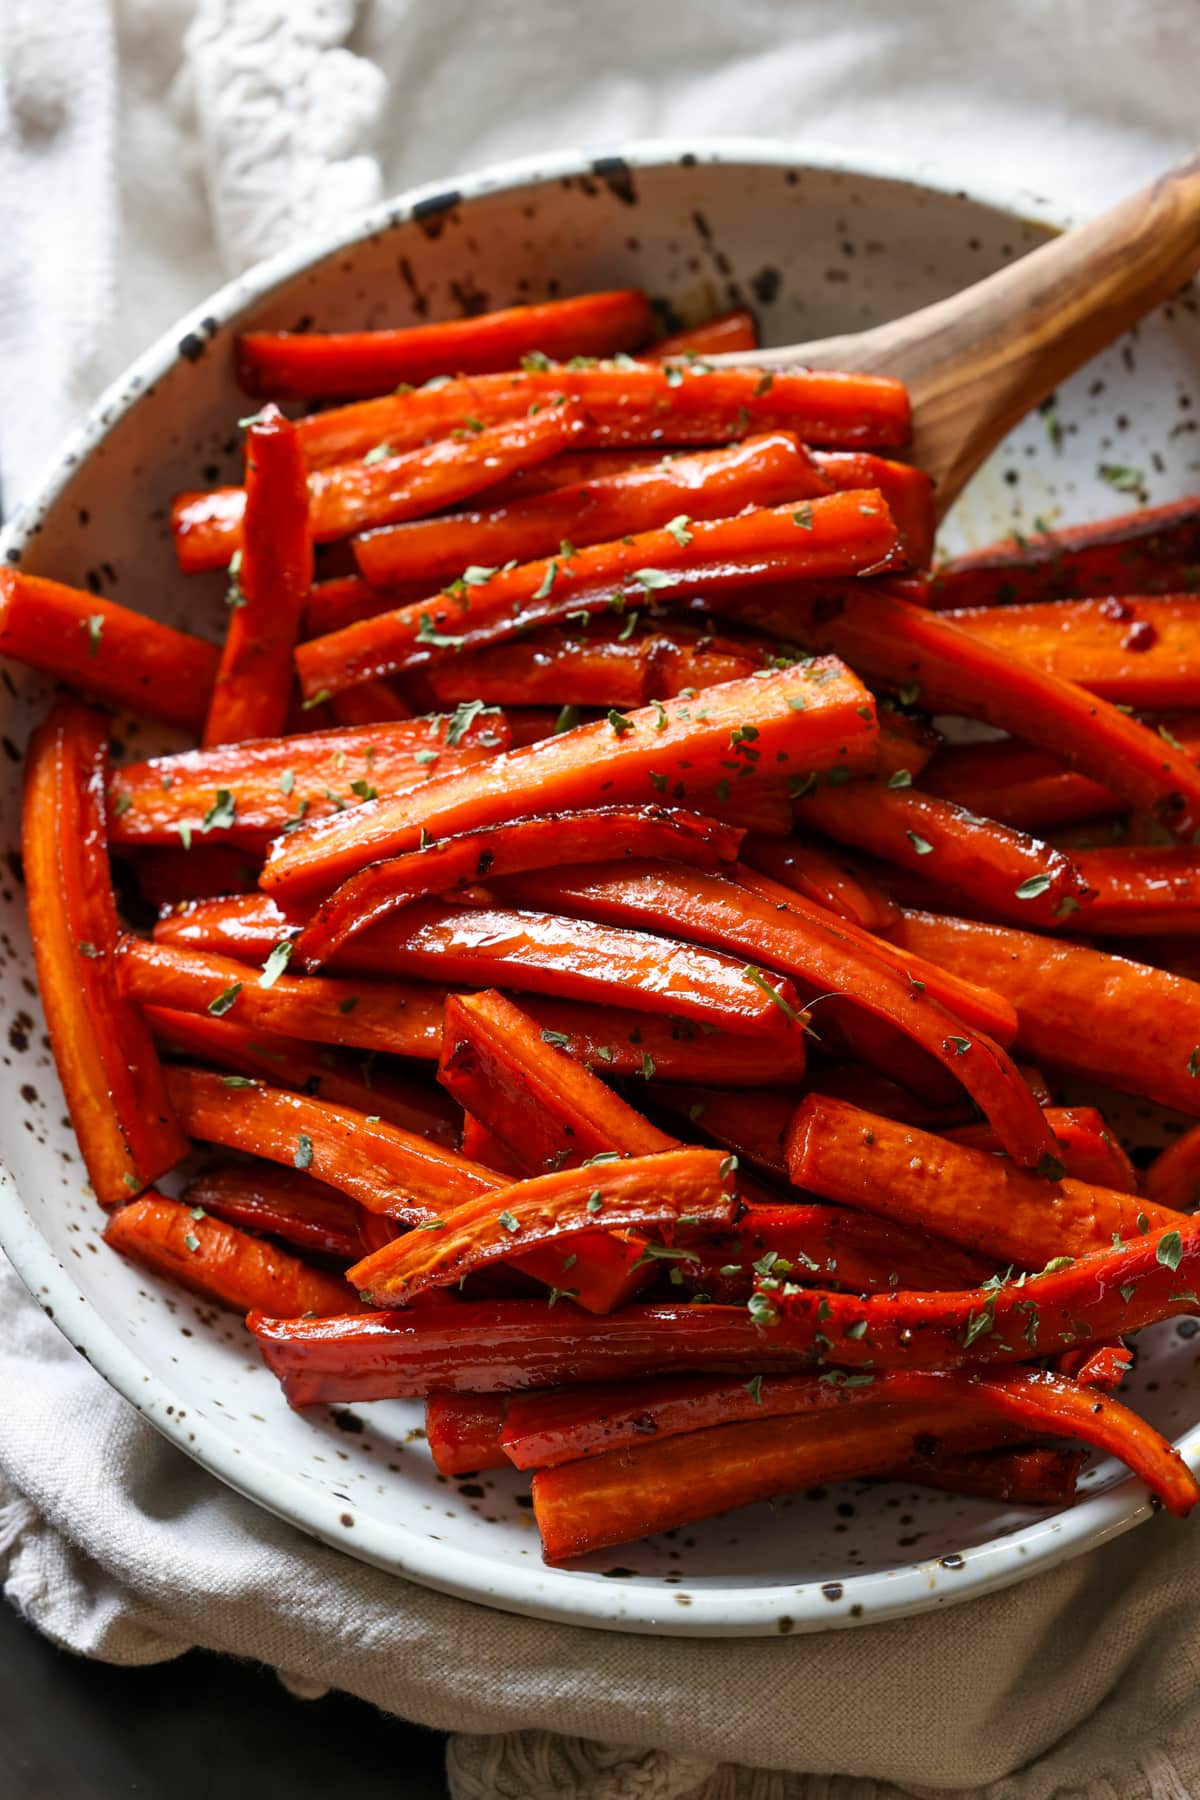 Roasted carrots in a serving bowl with a wooden serving spoon